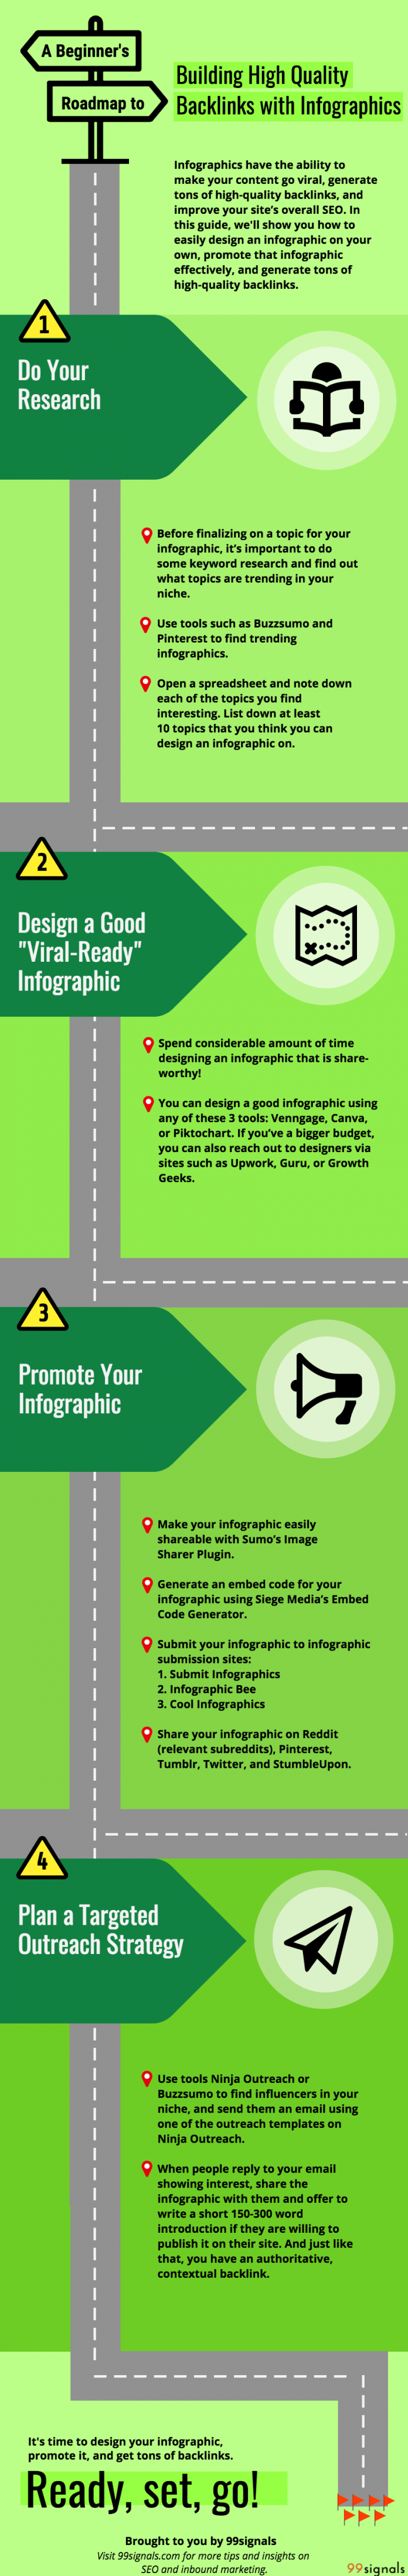 Building High Quality Backlinks with Infographics